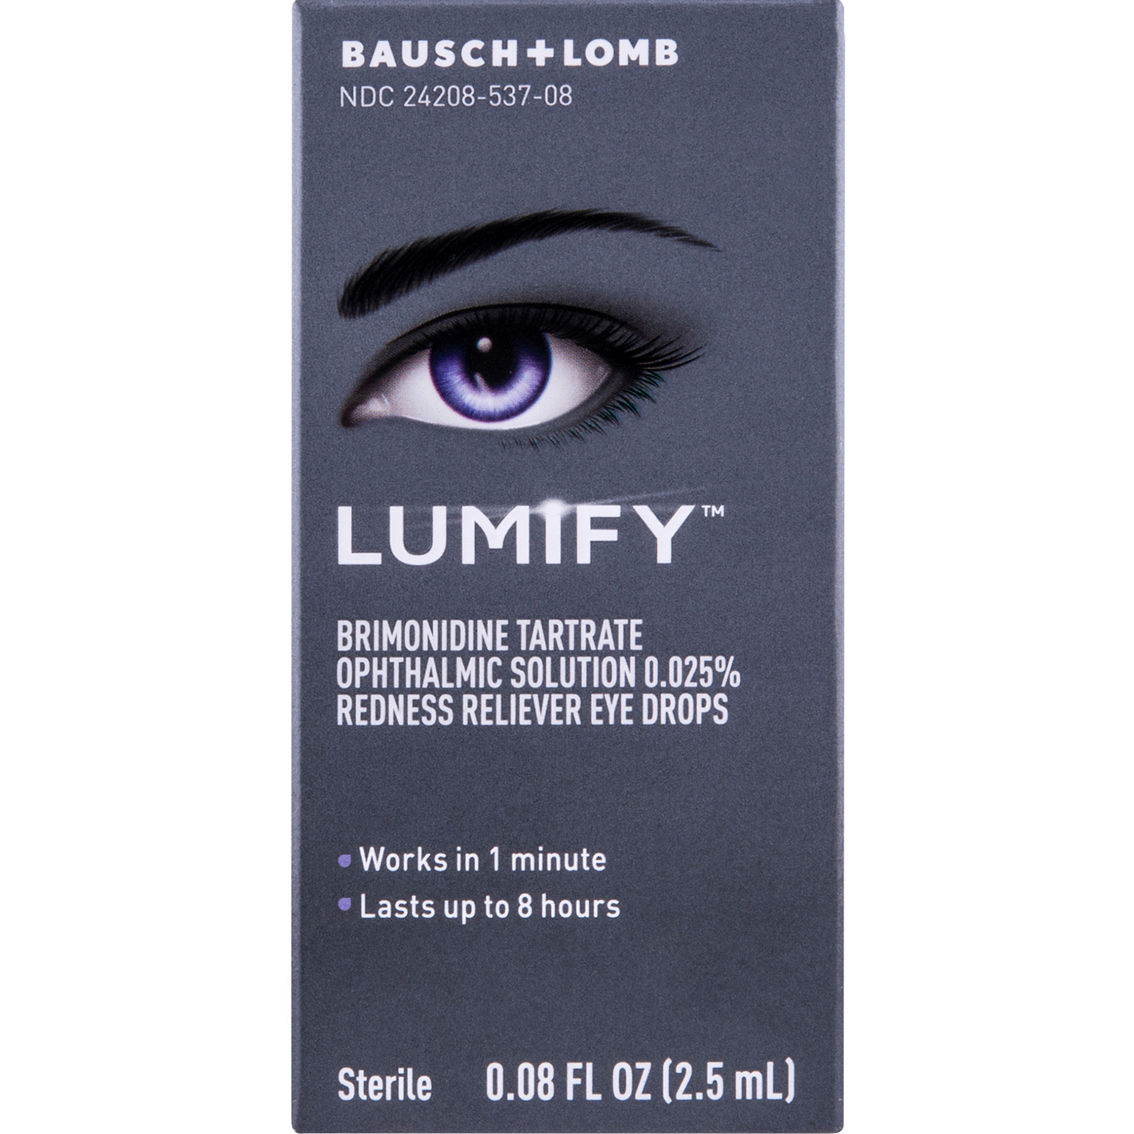 Bausch & Lomb Lumify Redness Reliever Eye Drops - Image 2 of 6